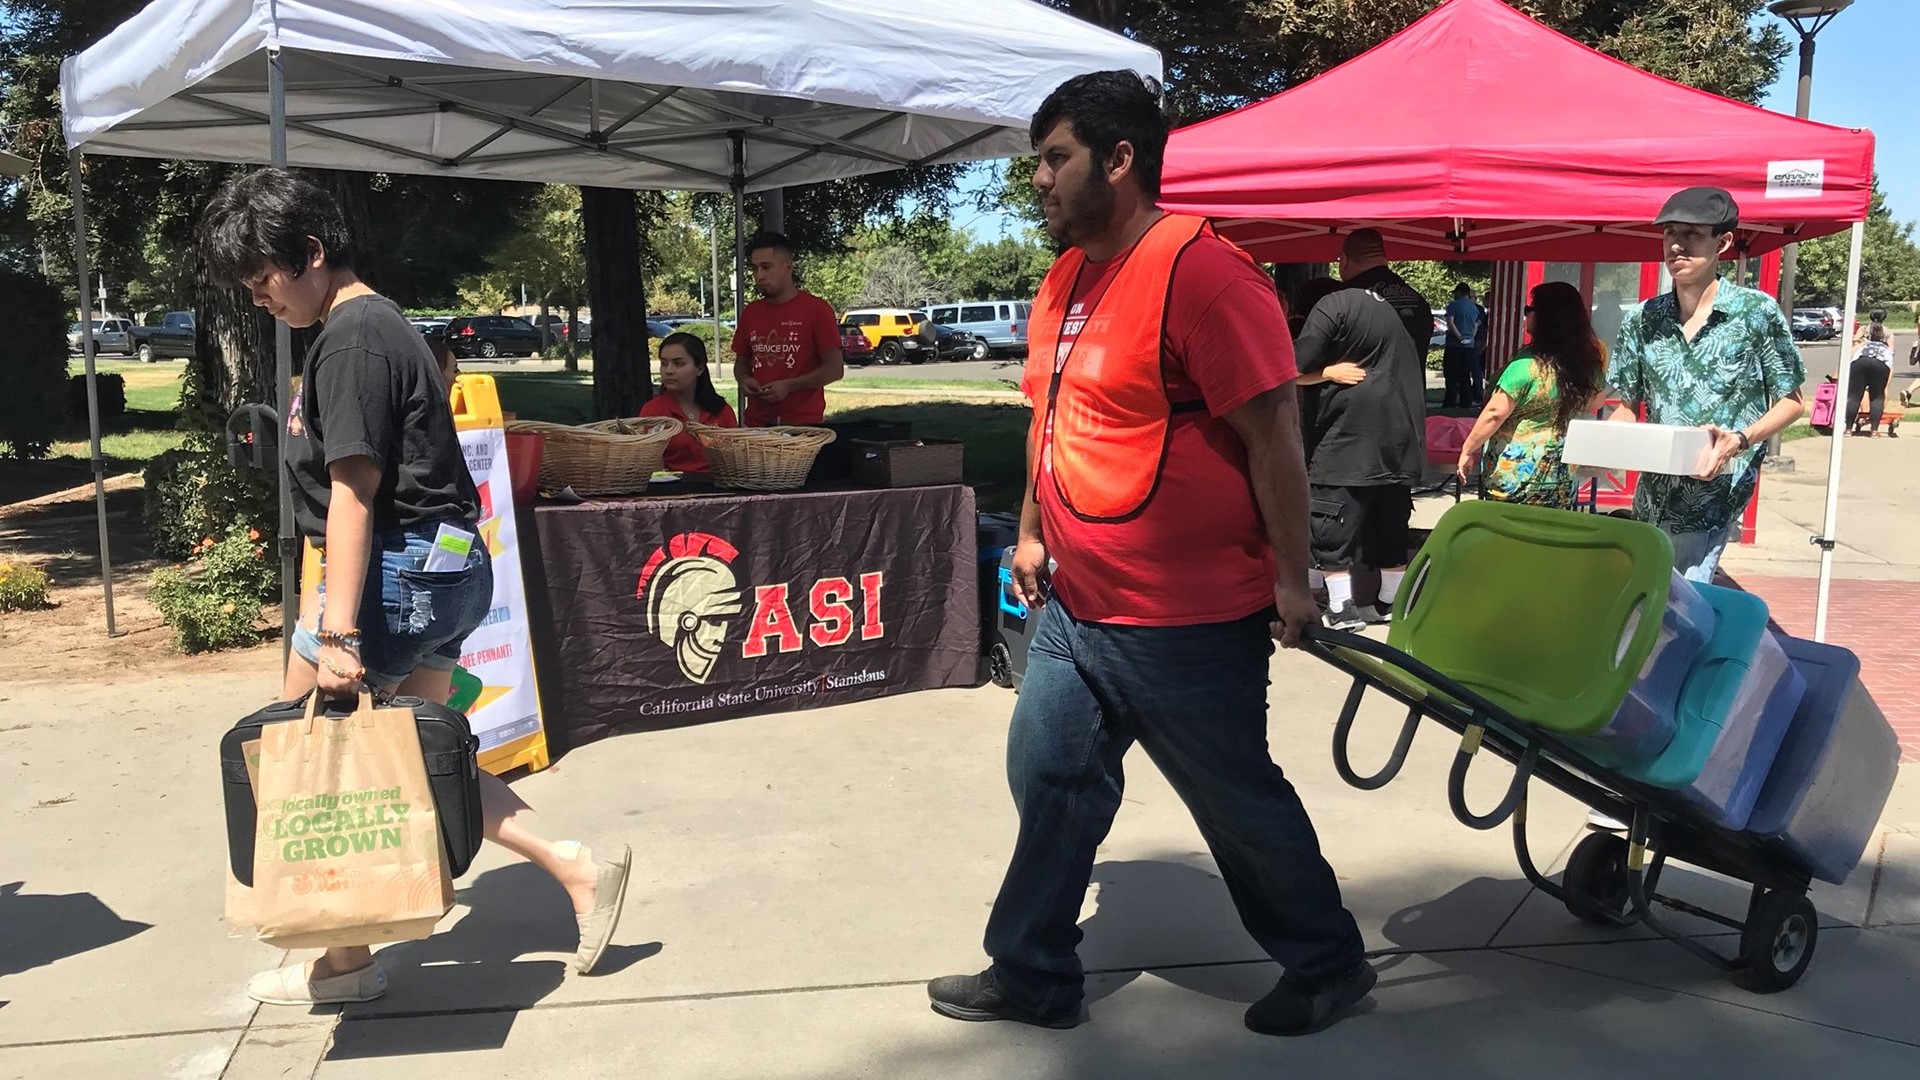 The total freshman class at Stanislaus State University in Turlock is estimated to be more than 1,600 total students, 80 percent of whom are first-generation college students.